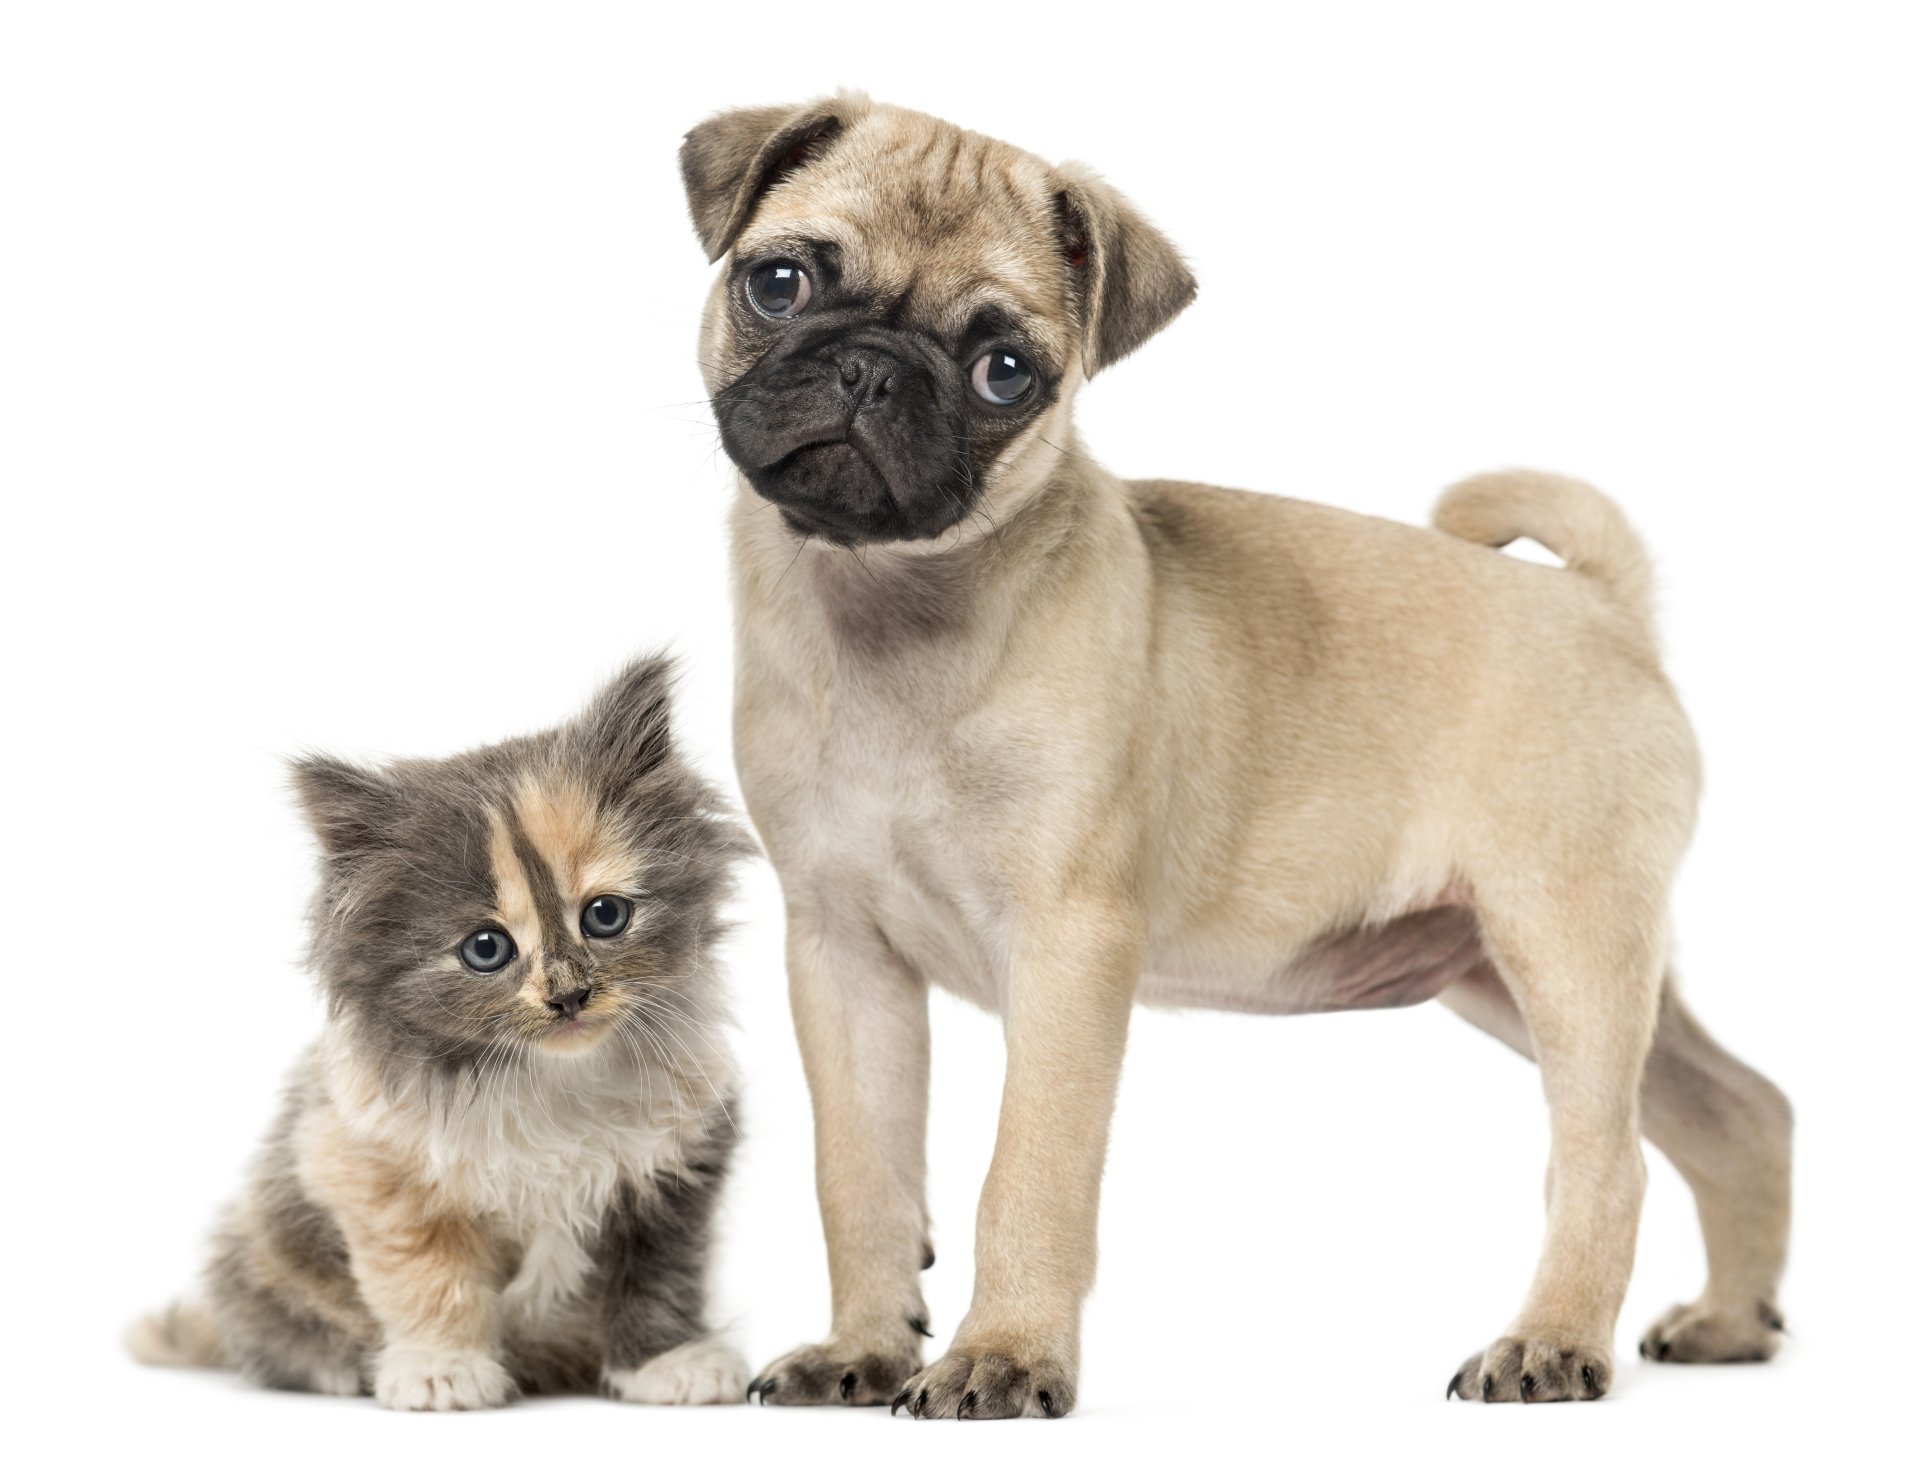 Pug puppy and European shorthair kitten standing on a white studio backdrop.